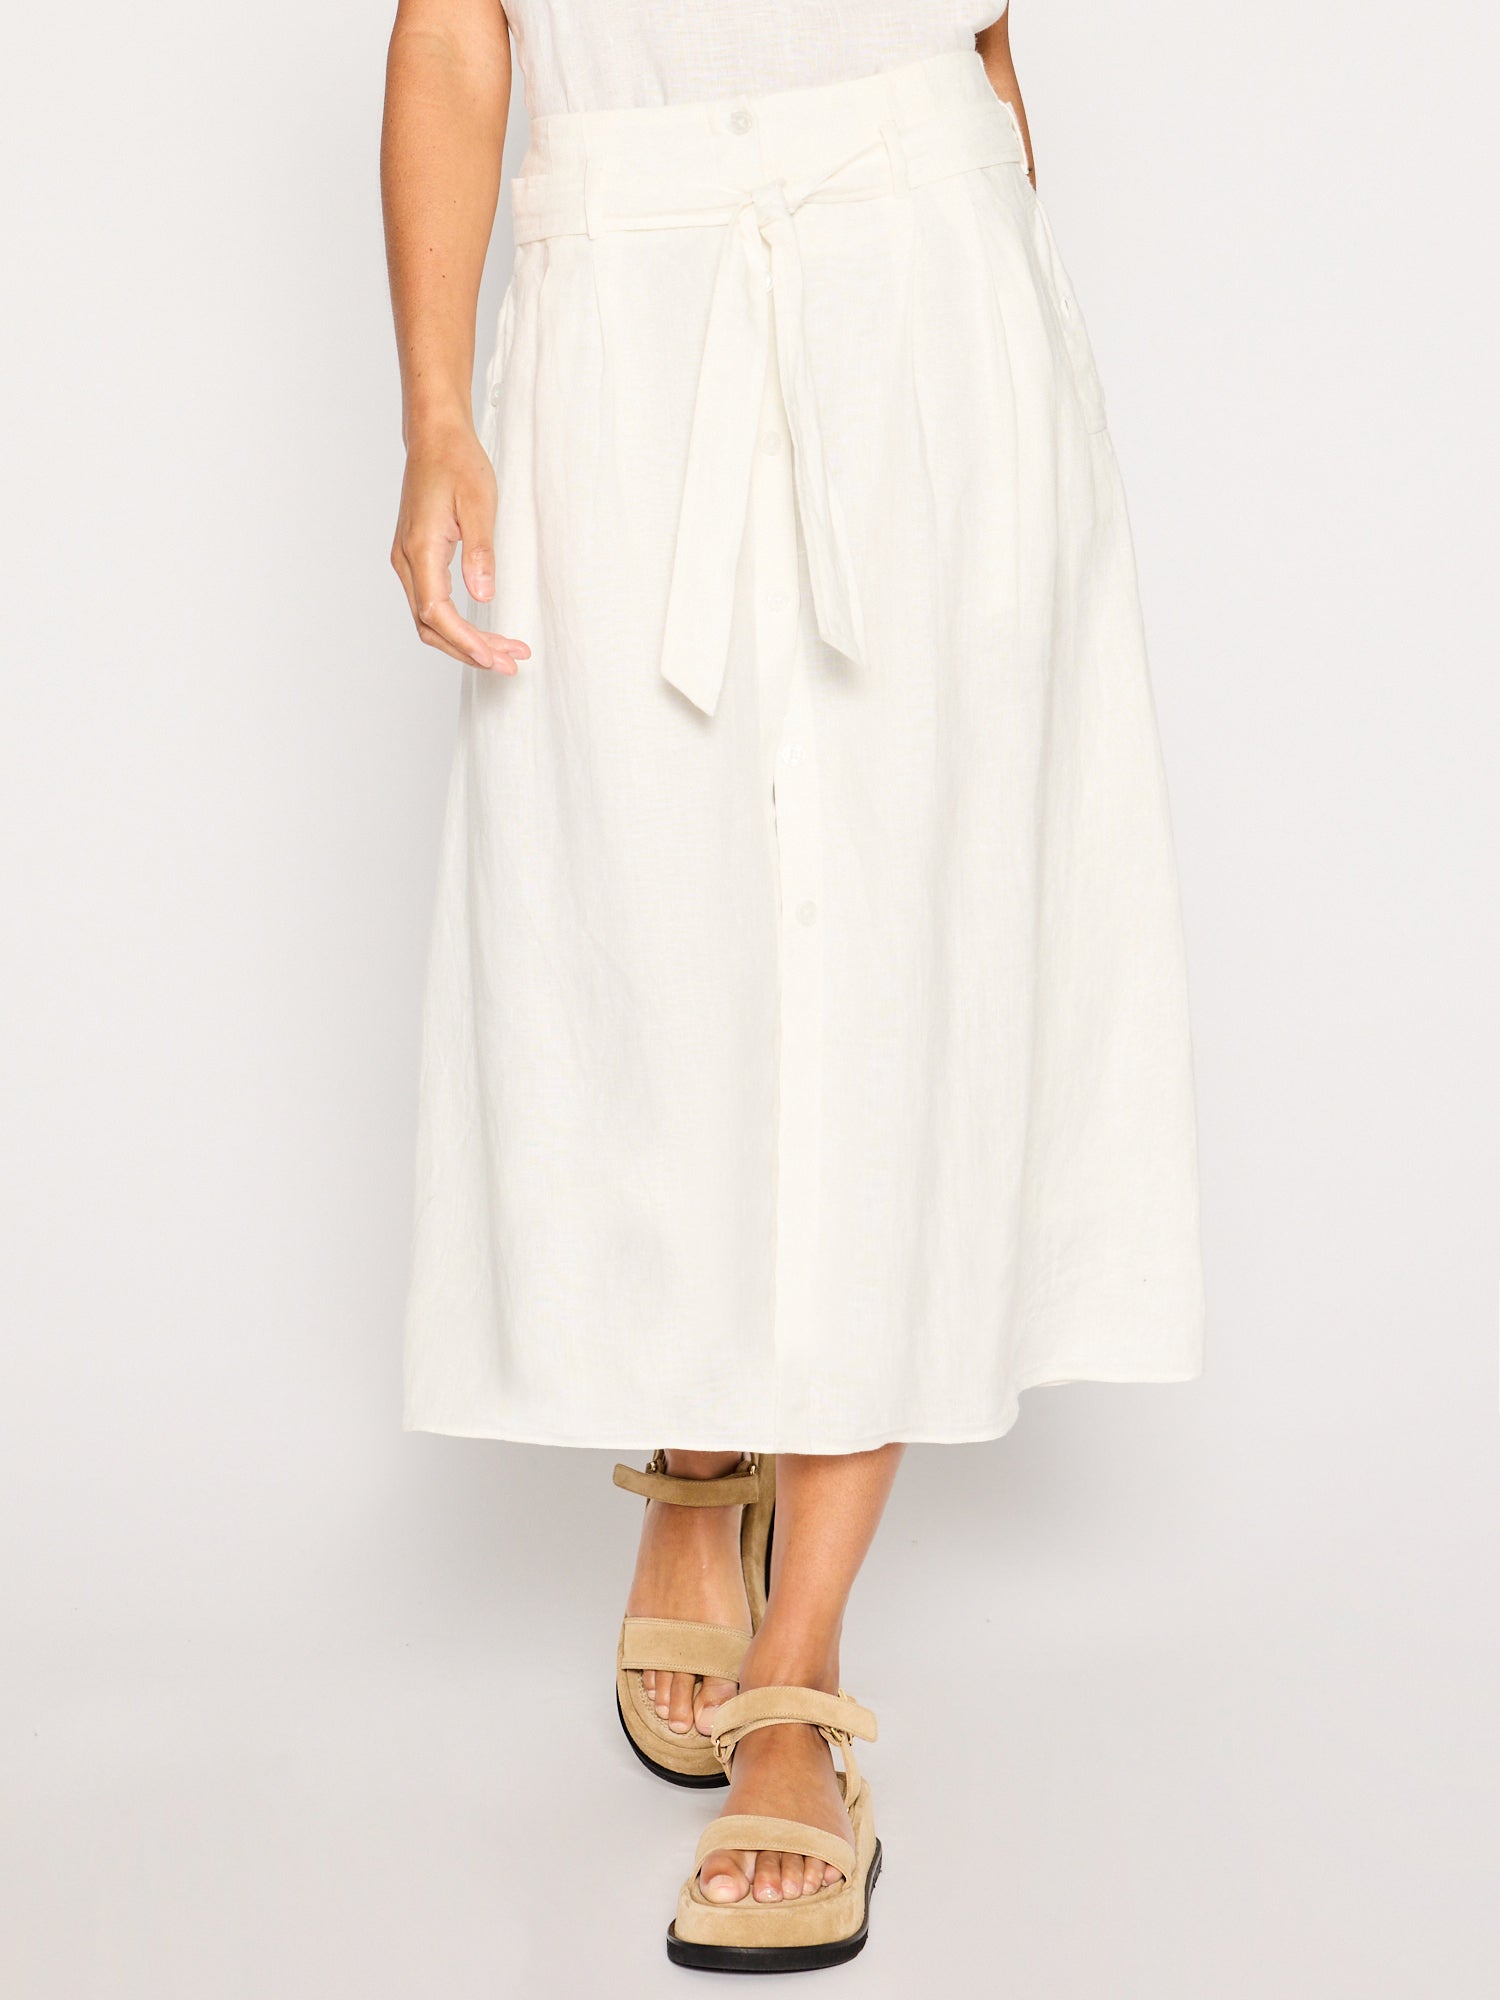 Teagan ivory belted button front midi skirt front view